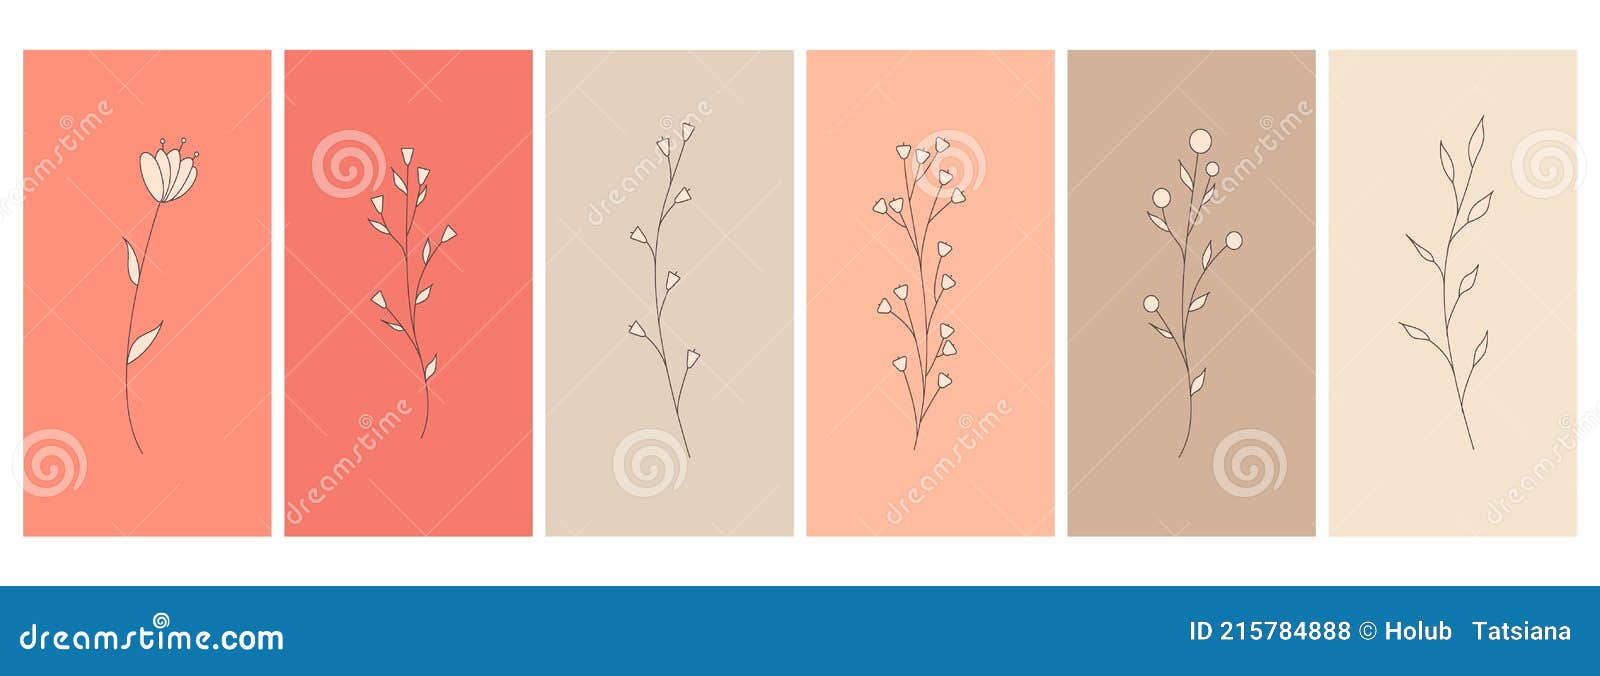 abstract s, minimalistic simple floral s. leaves and flowers. collection of art posters in pastel colors